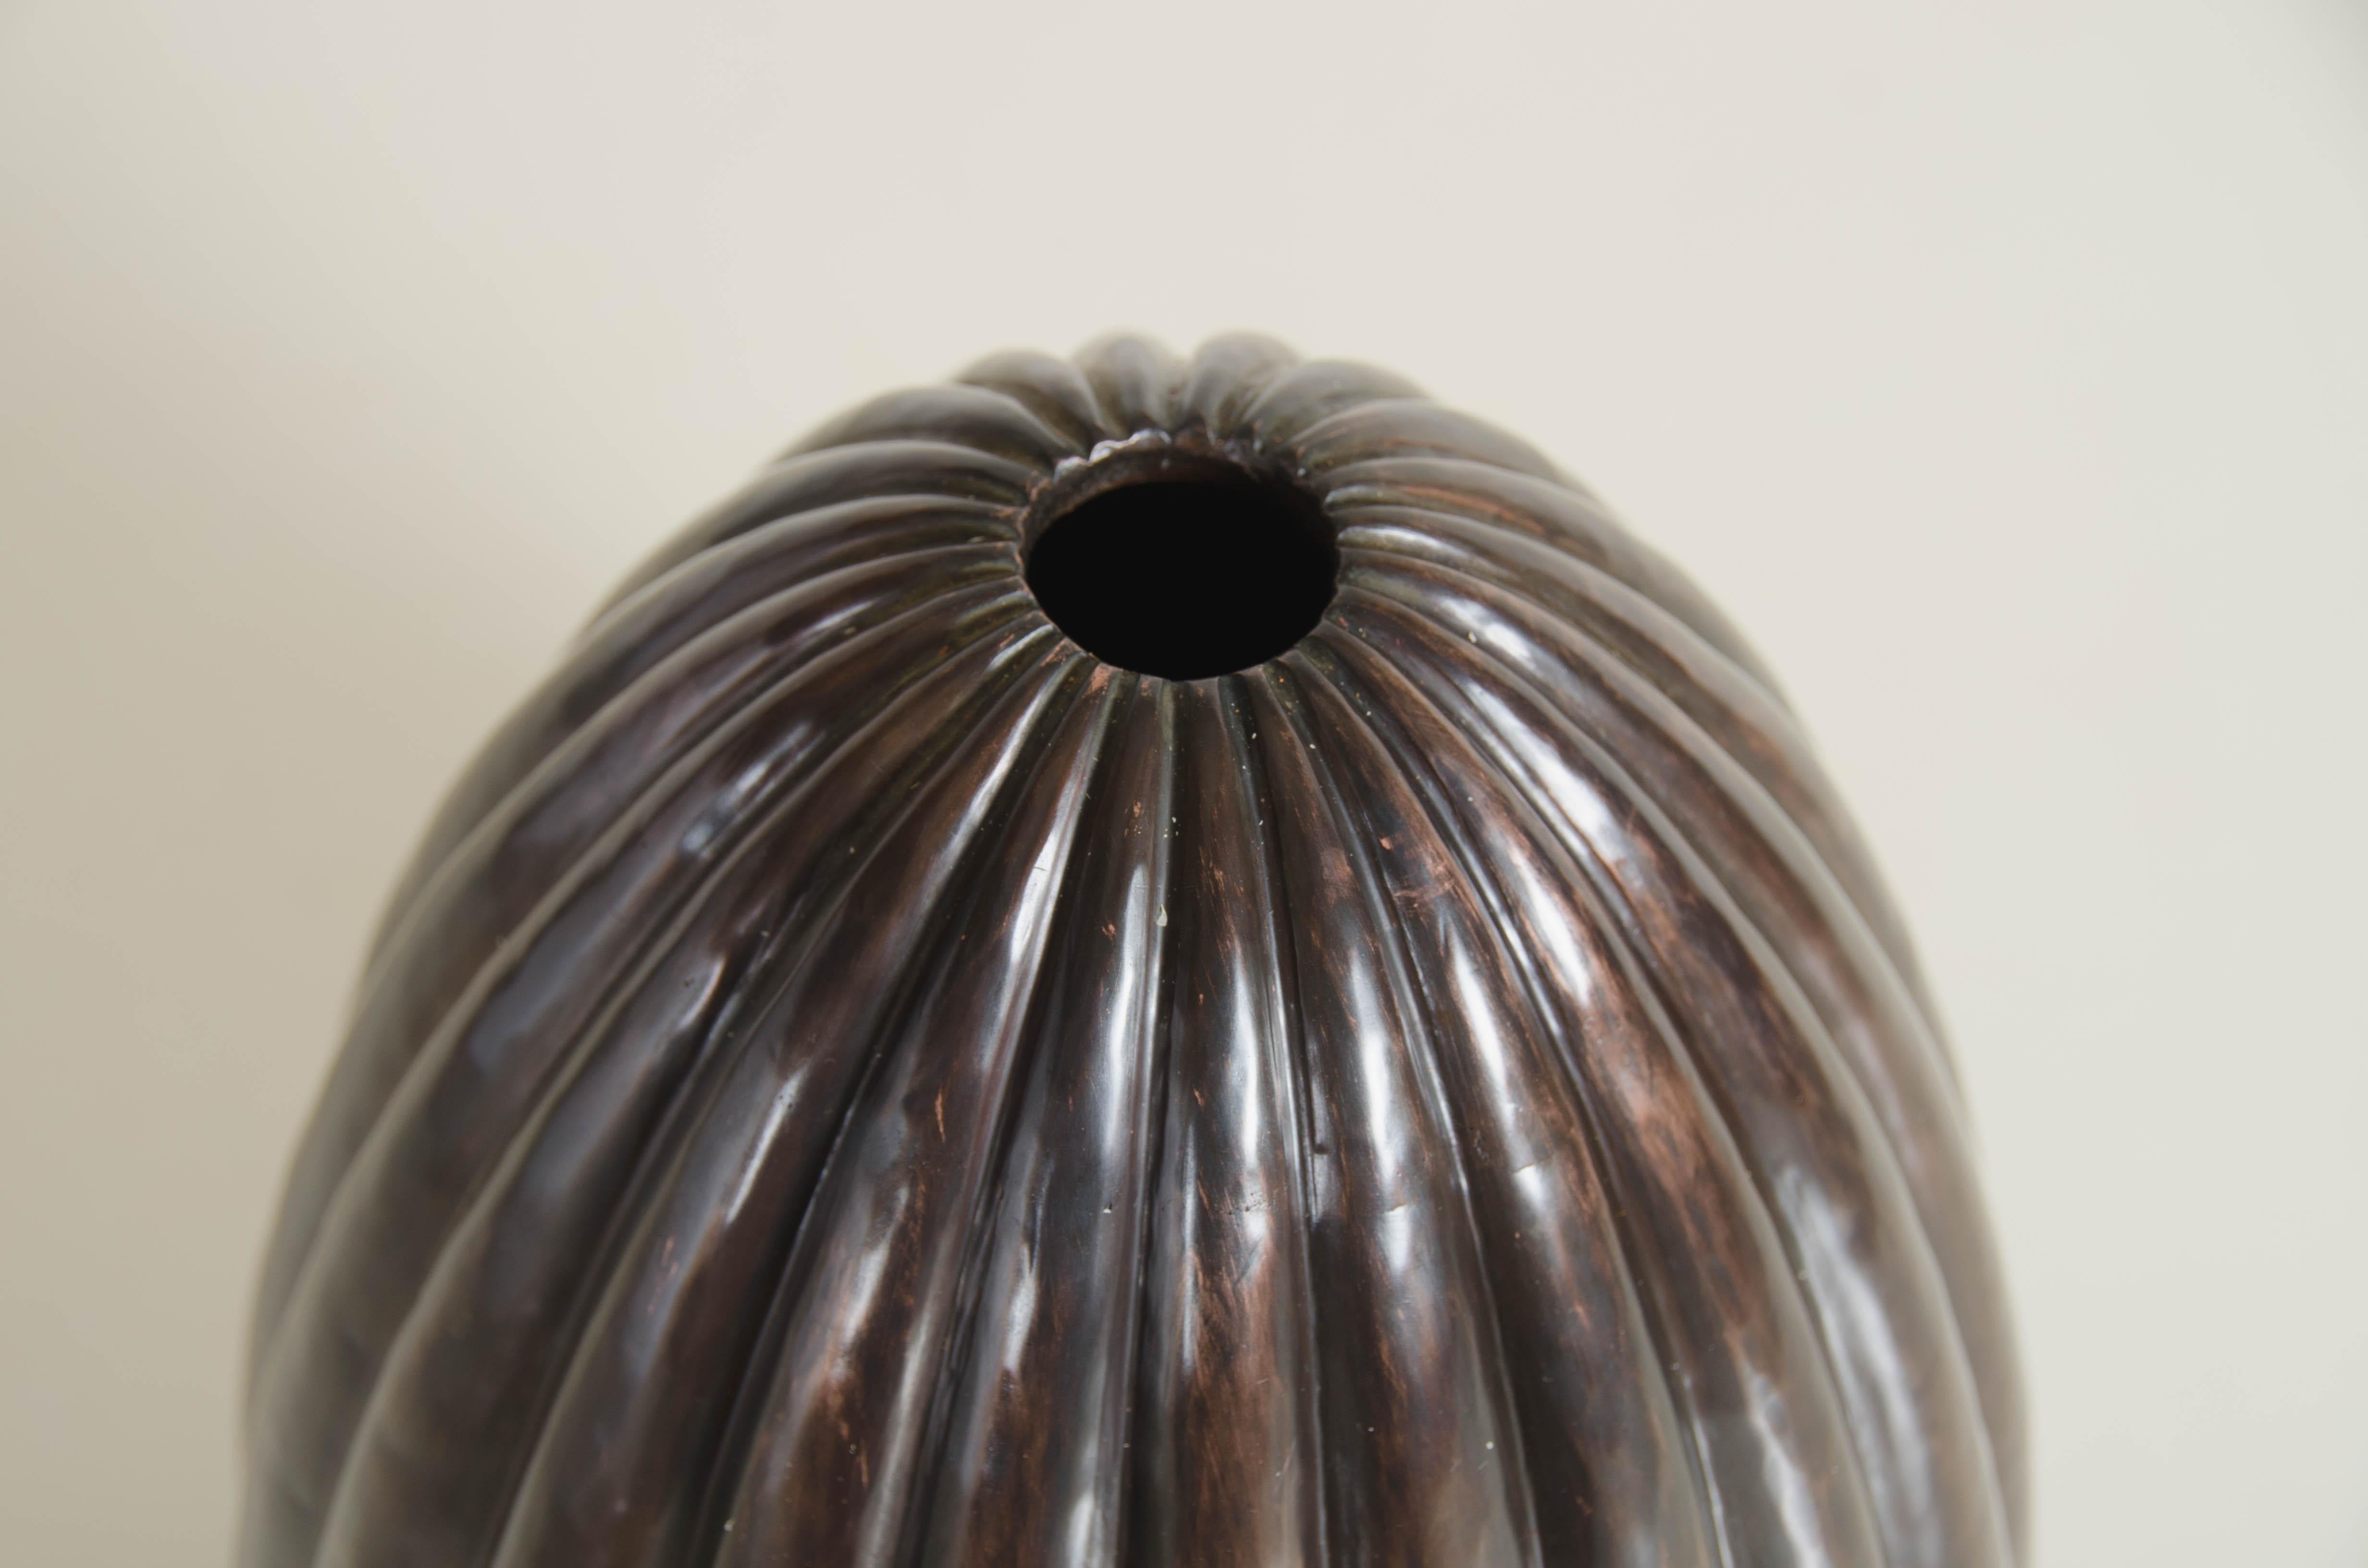 Repoussé Lobed Vase in Antique Copper by Robert Kuo, Limited Edition For Sale